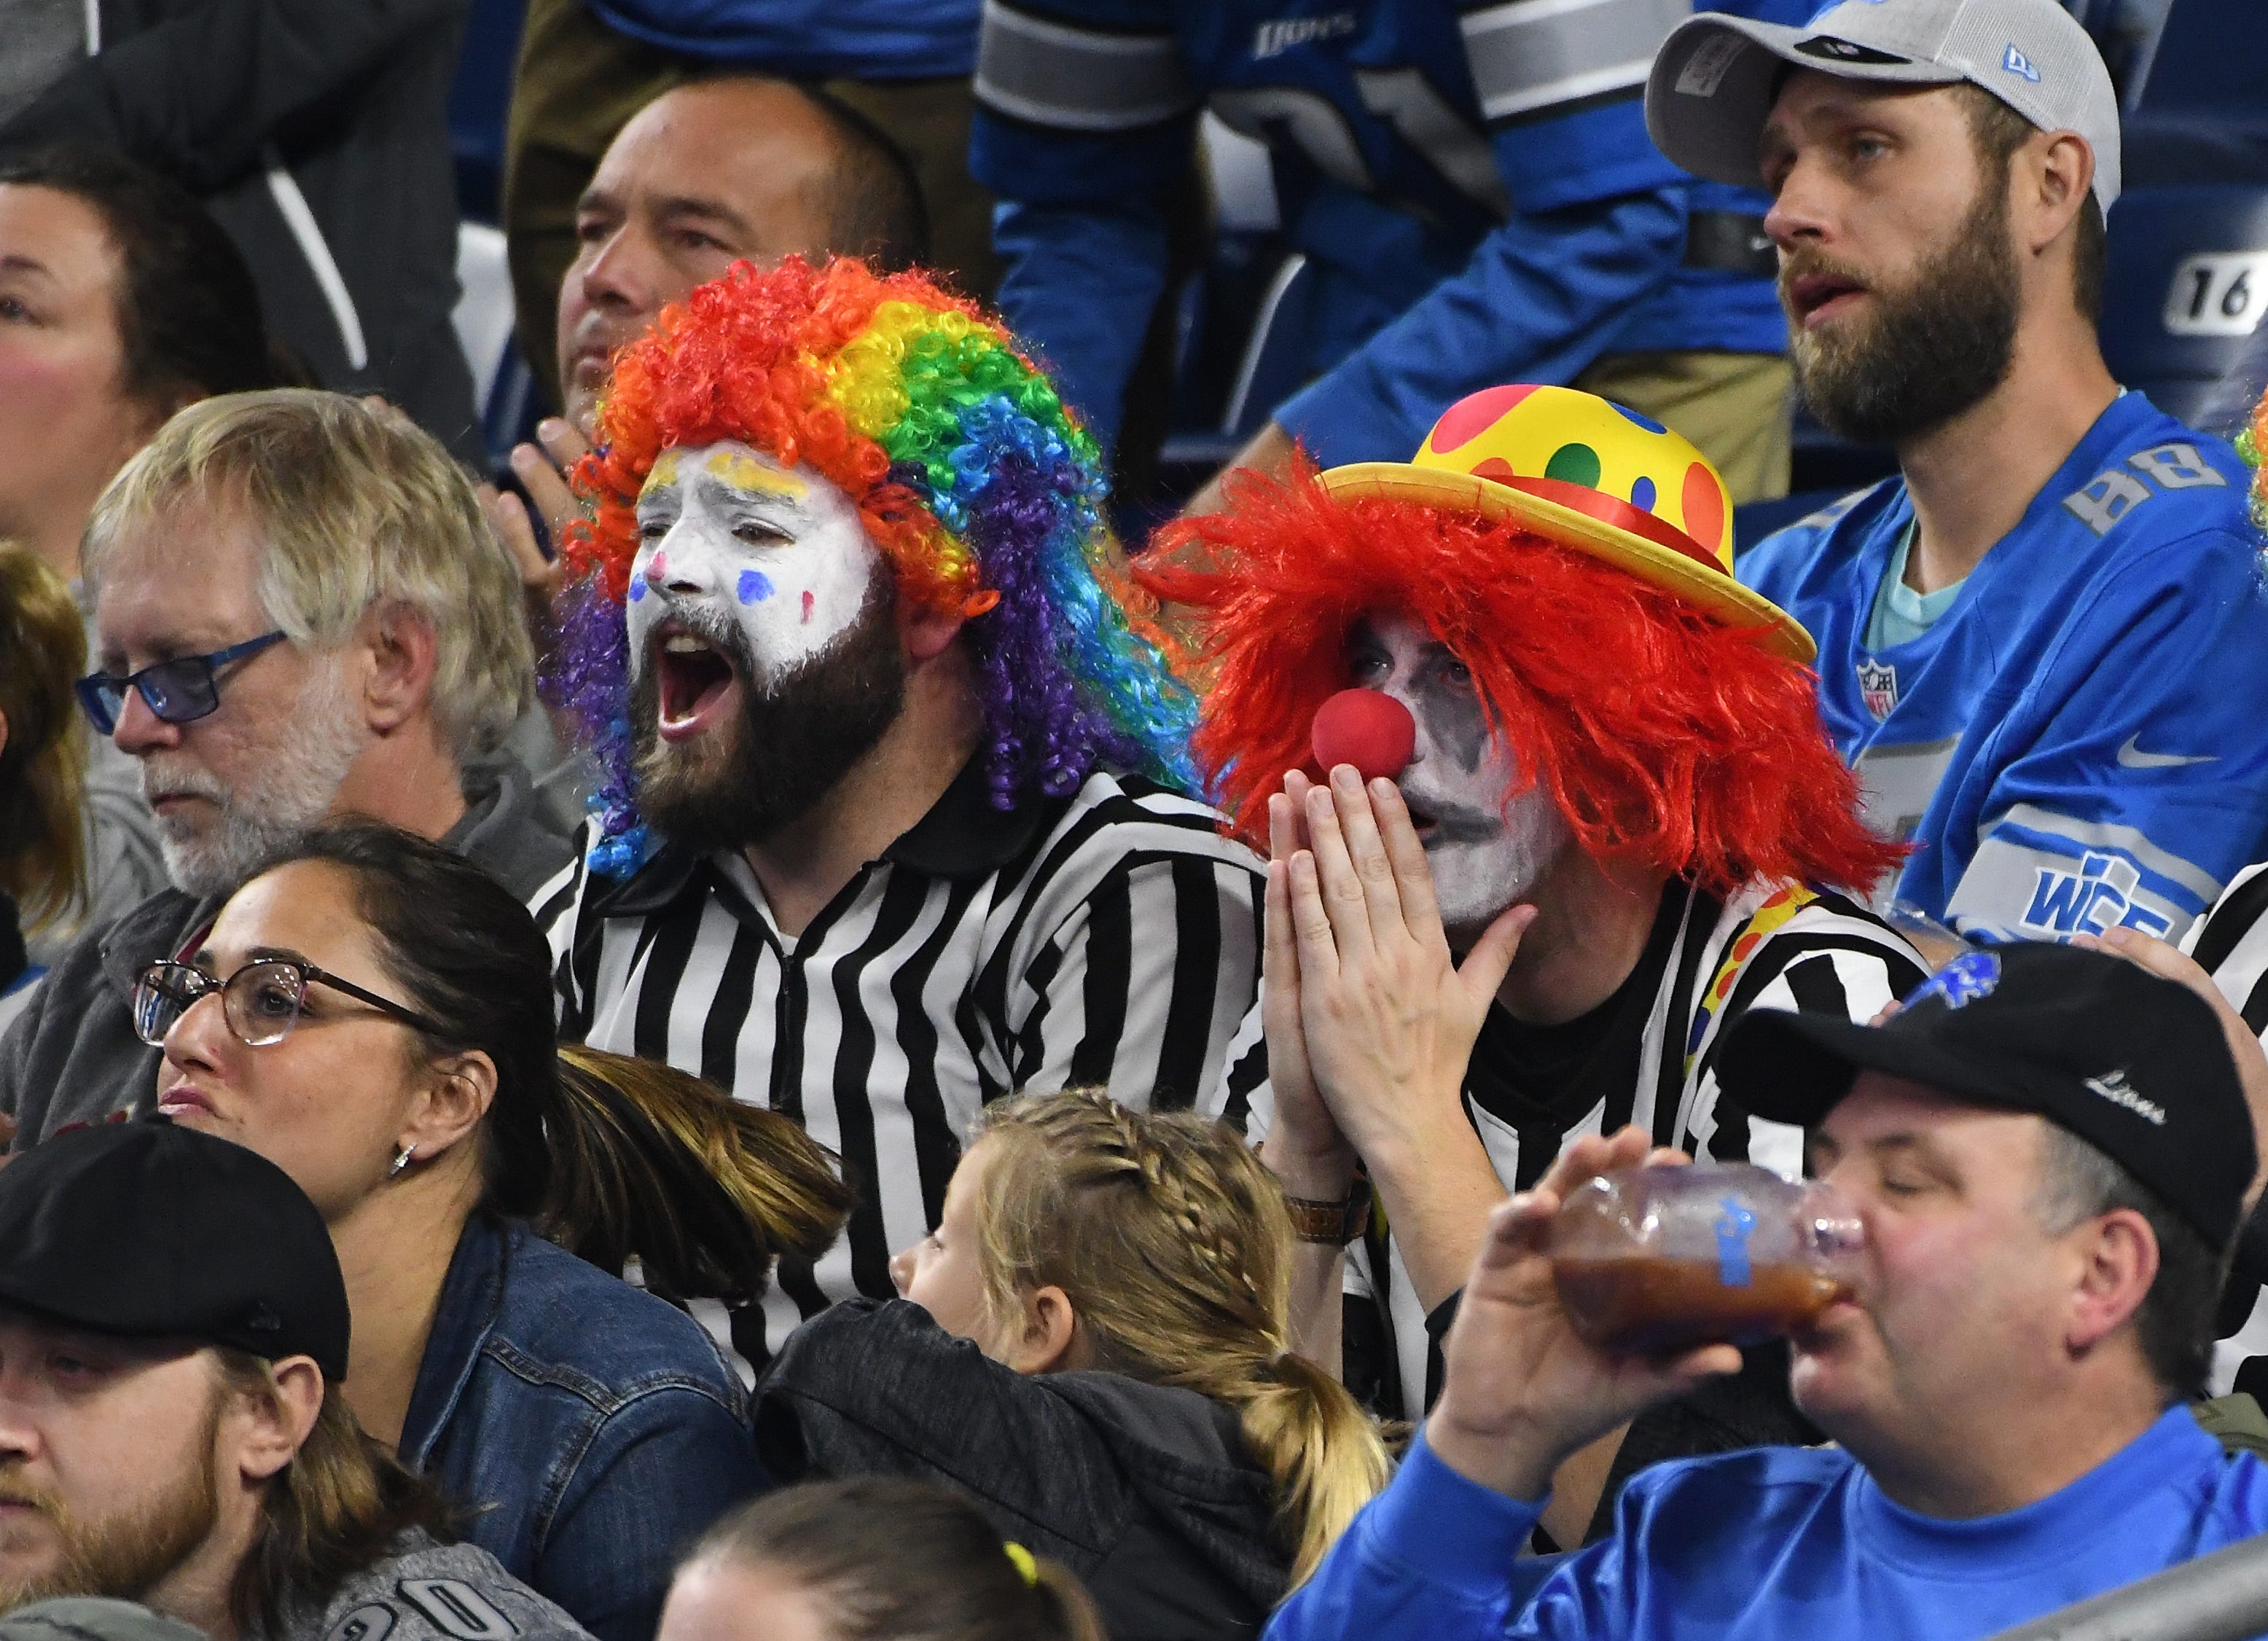 Fans dressed in referee clown outfits sit quietly as the Vikings slowly take down the Lions in a 42-30 loss at Ford Field.